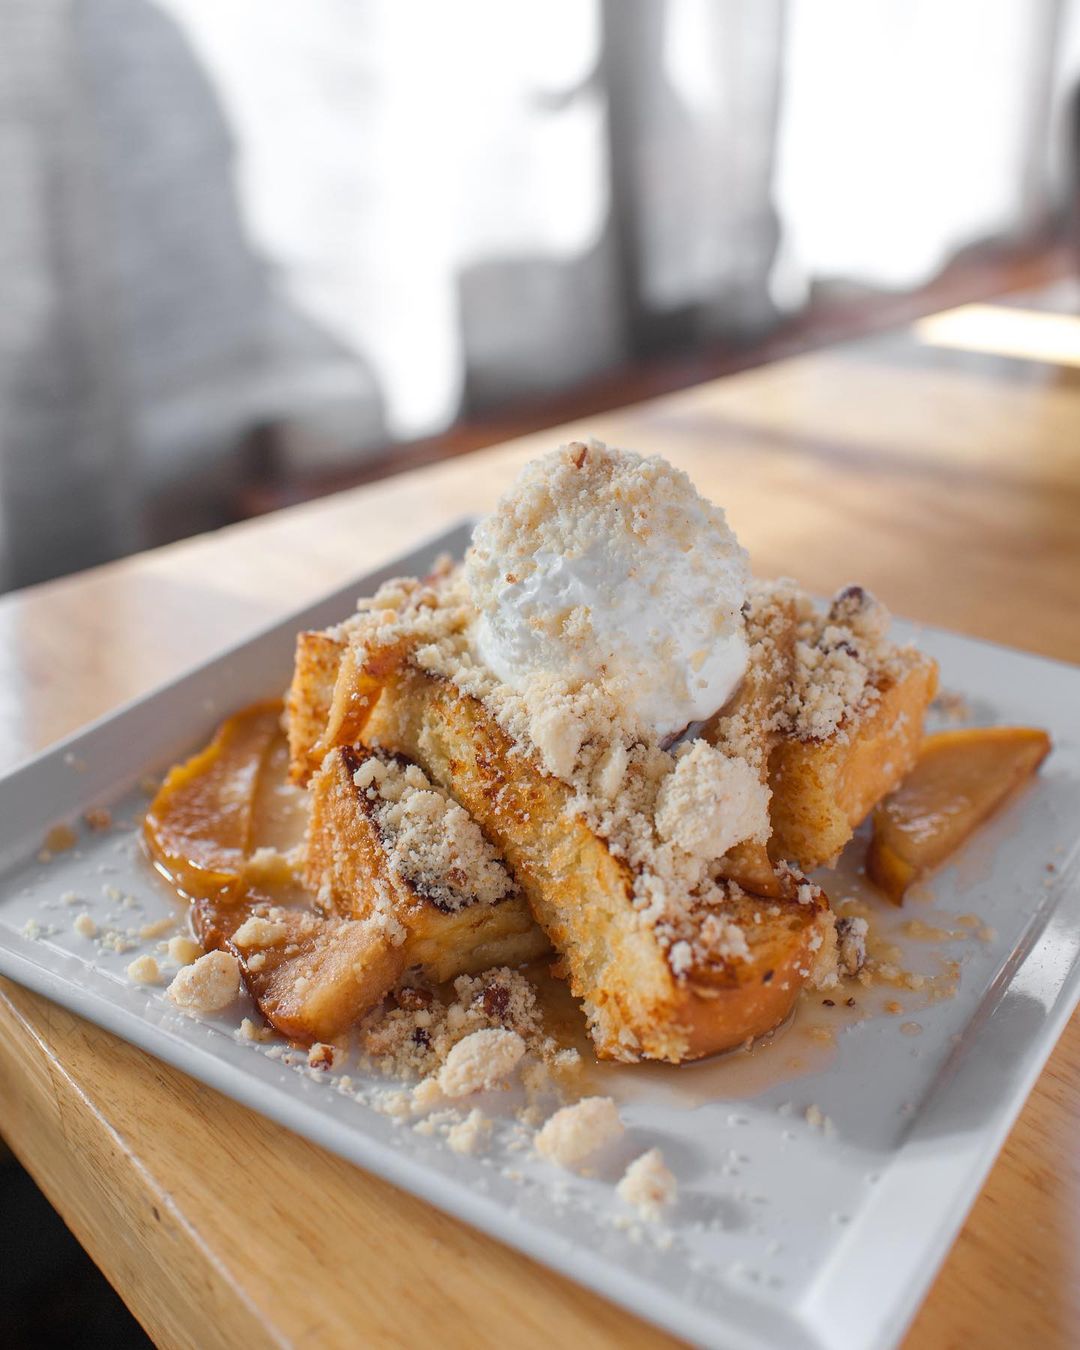 Pear and pecan french toast on a plate at Bacon and Butter Sacramento. Photo by Instagram user @baconandbuttersac.